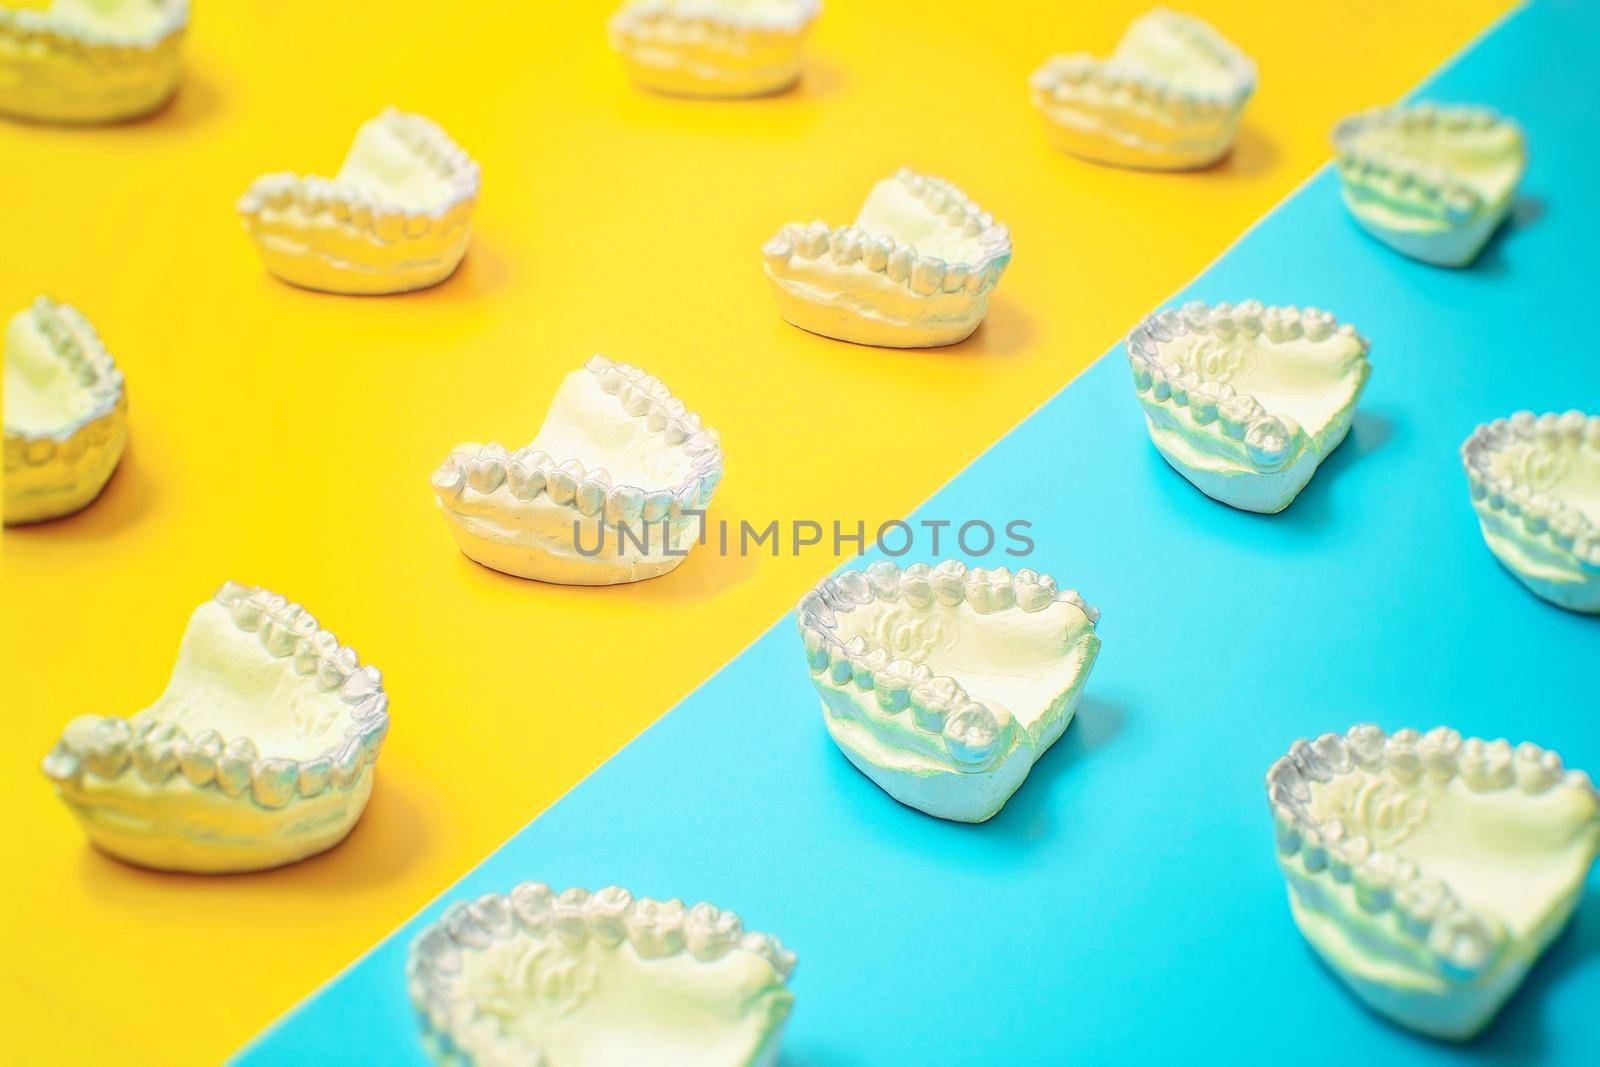 Orthodontic dental theme on blue and yellow background.Transparent invisible dental aligners or braces aplicable for an orthodontic dental treatment by Maximusnd